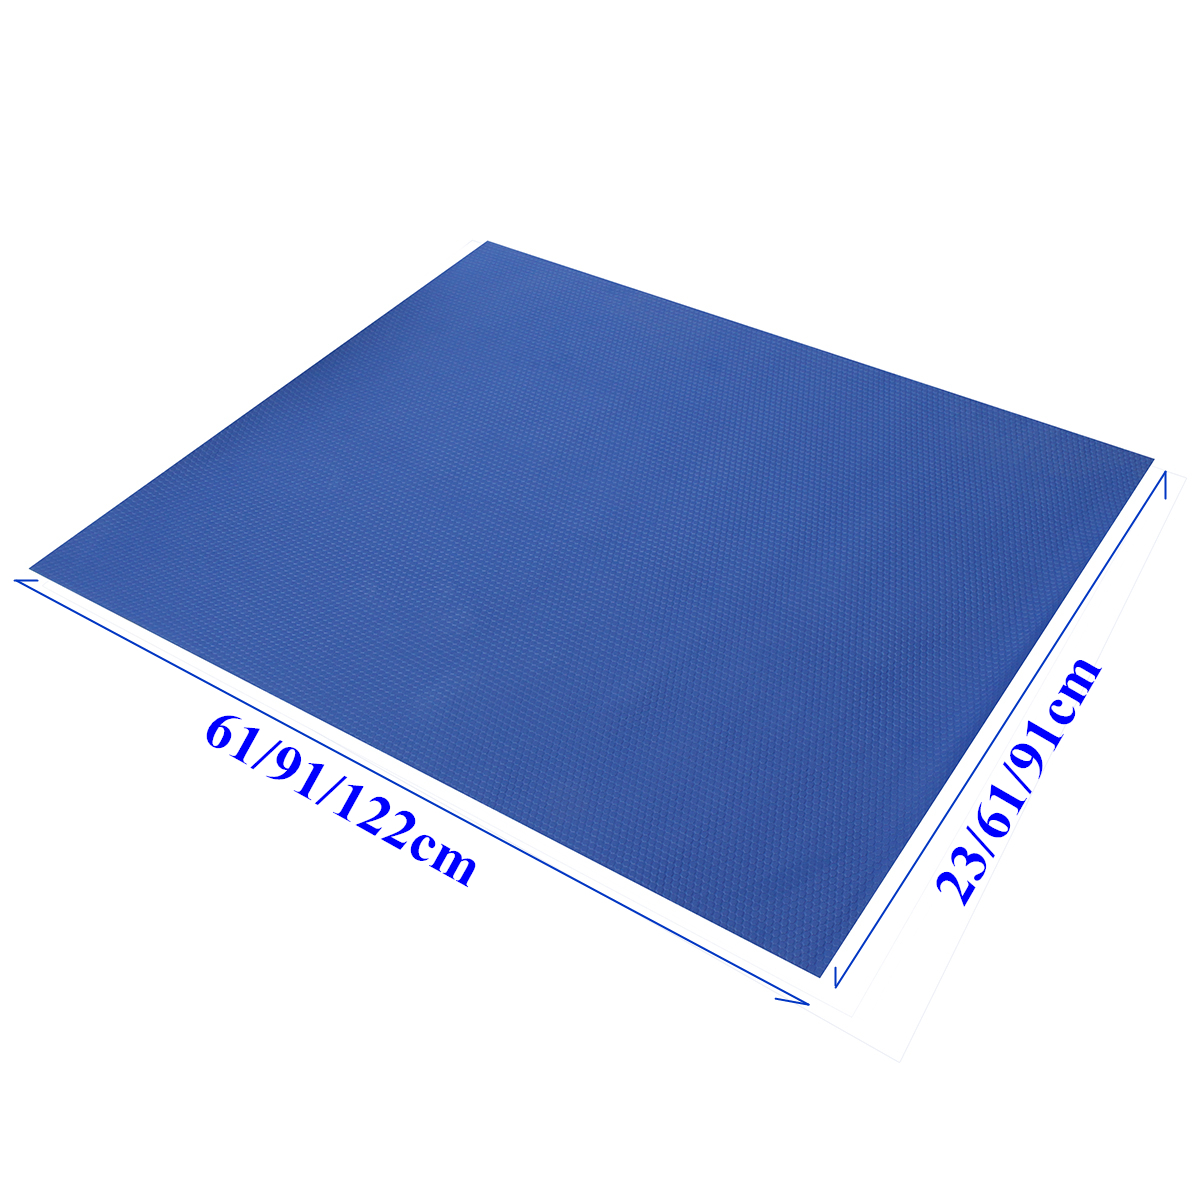 Multi-Size-PVC-Swimming-Pool-Anti-skip-Mat-Polyester-Cloth-Easy-To-Clean-Square-Swimming-Pool-Cover-1176086-3